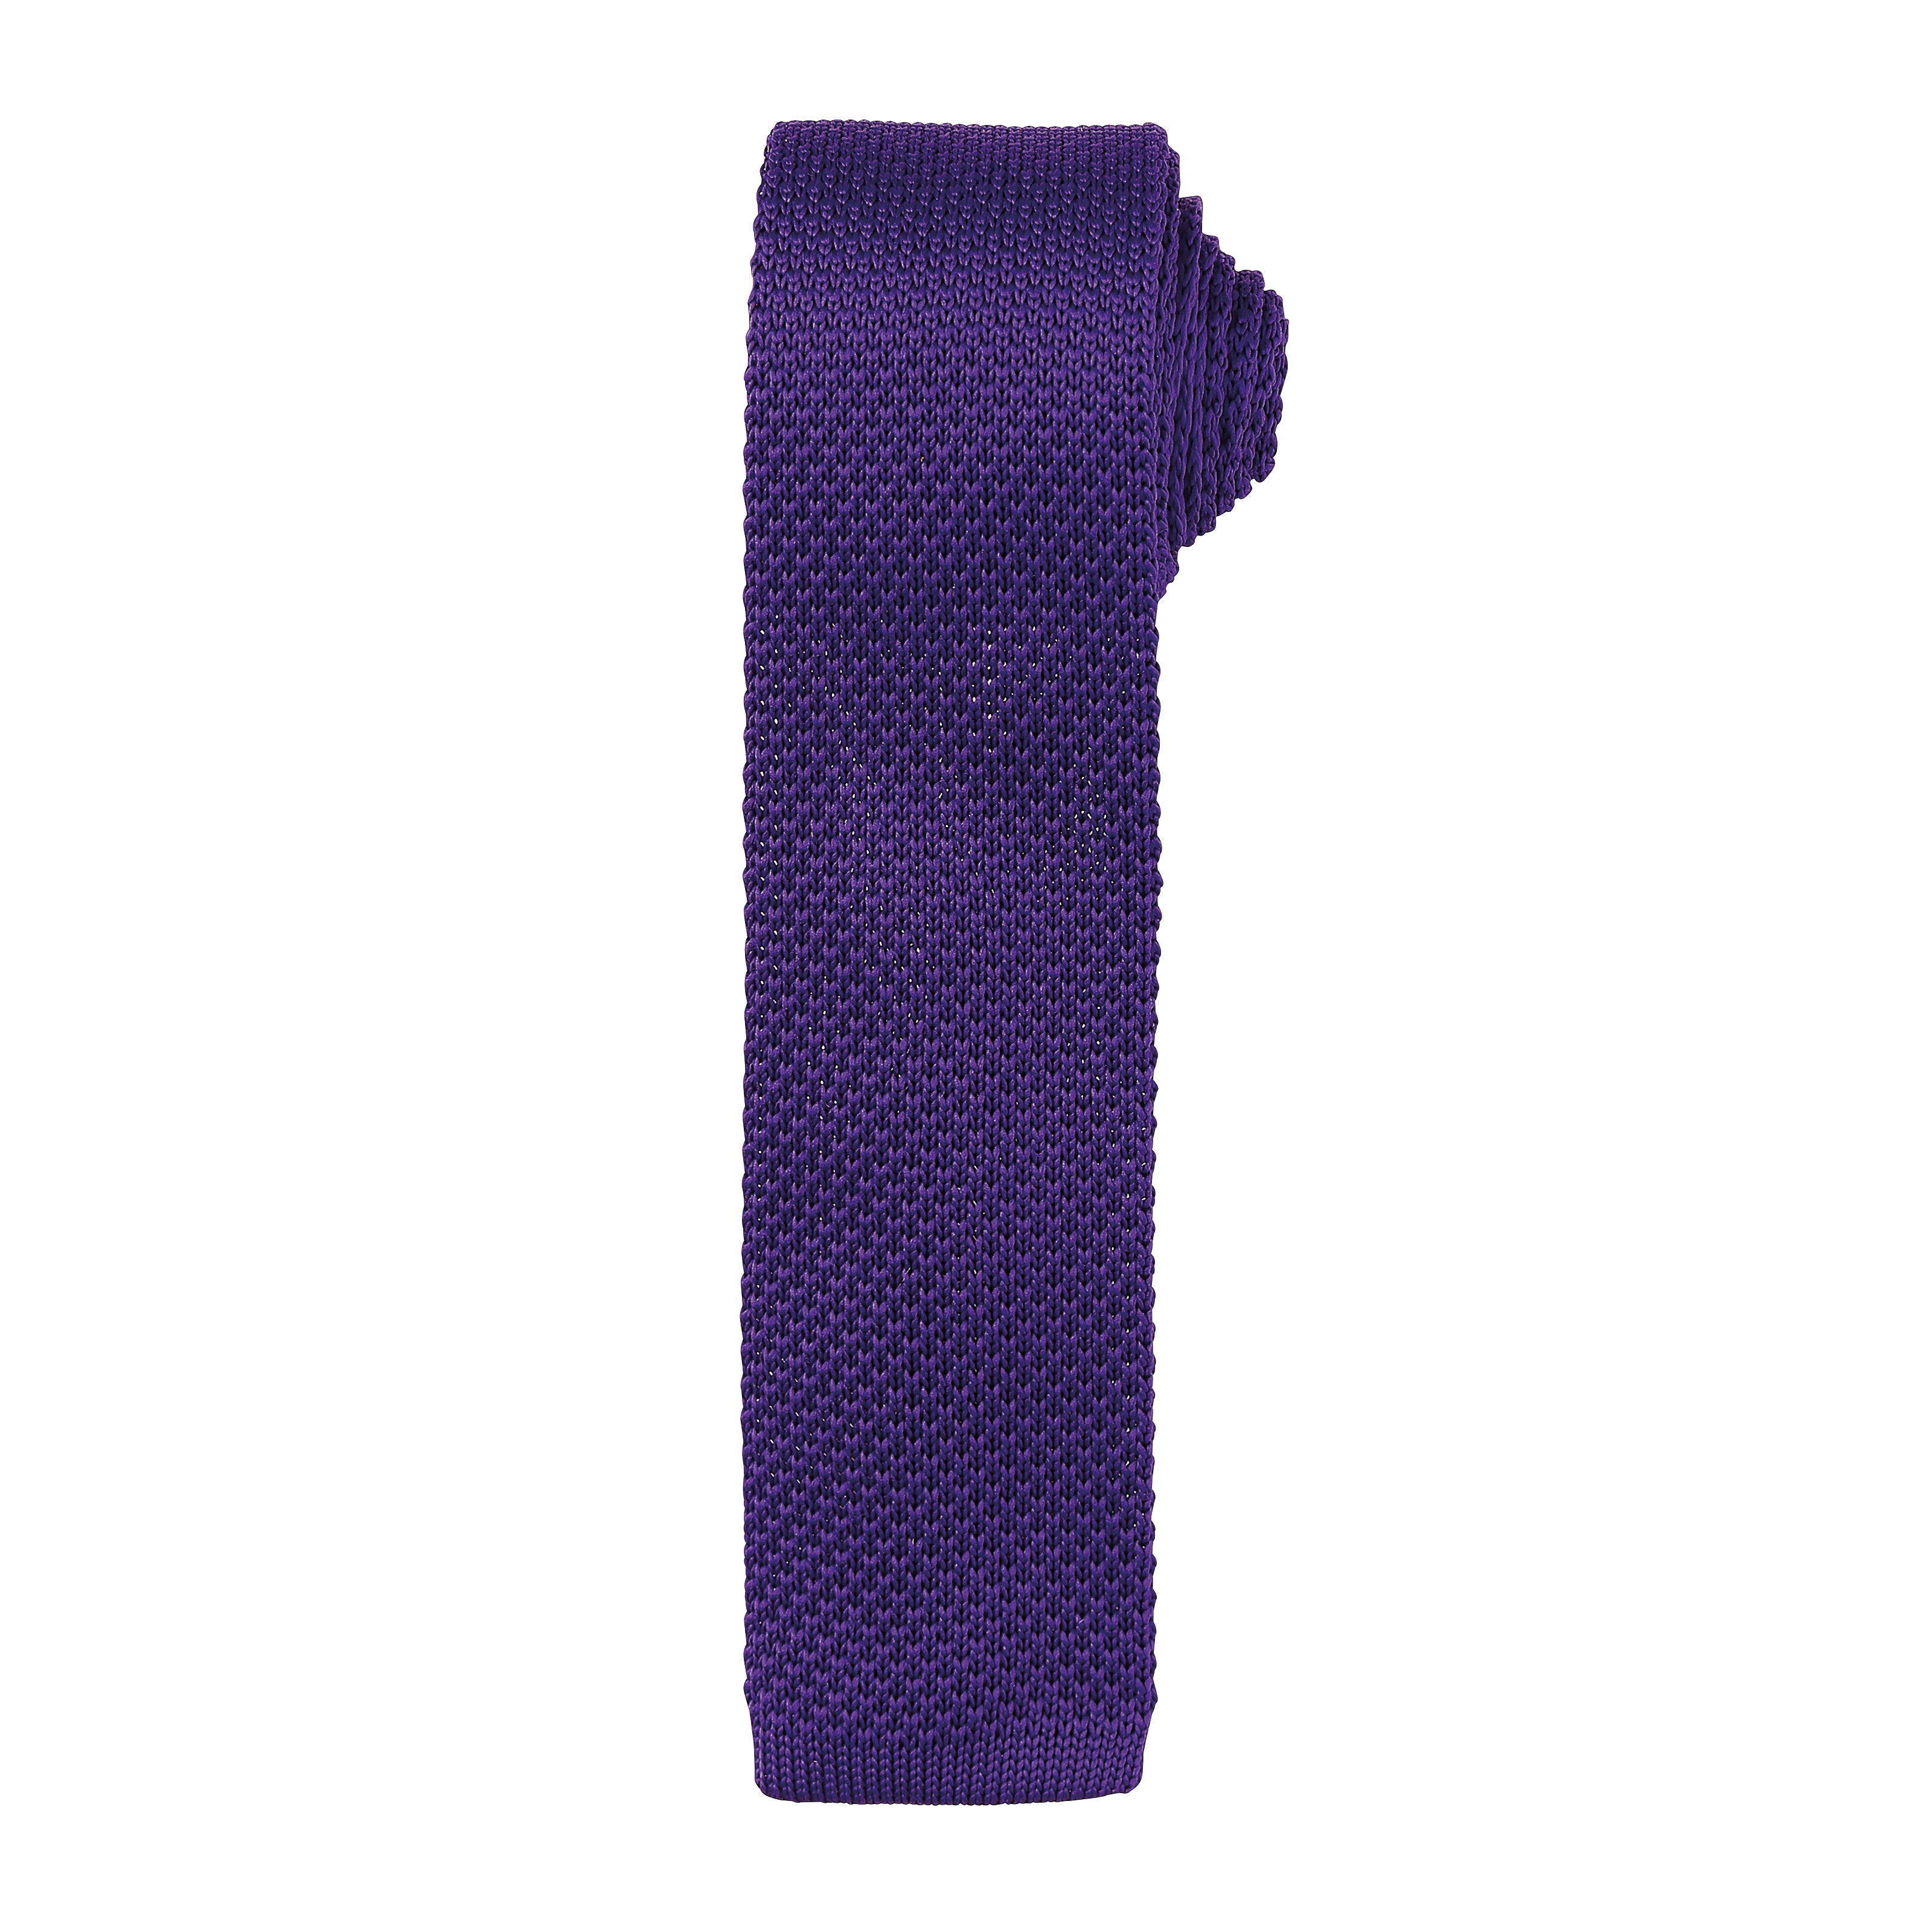 Slim knitted tie - Premier Collection